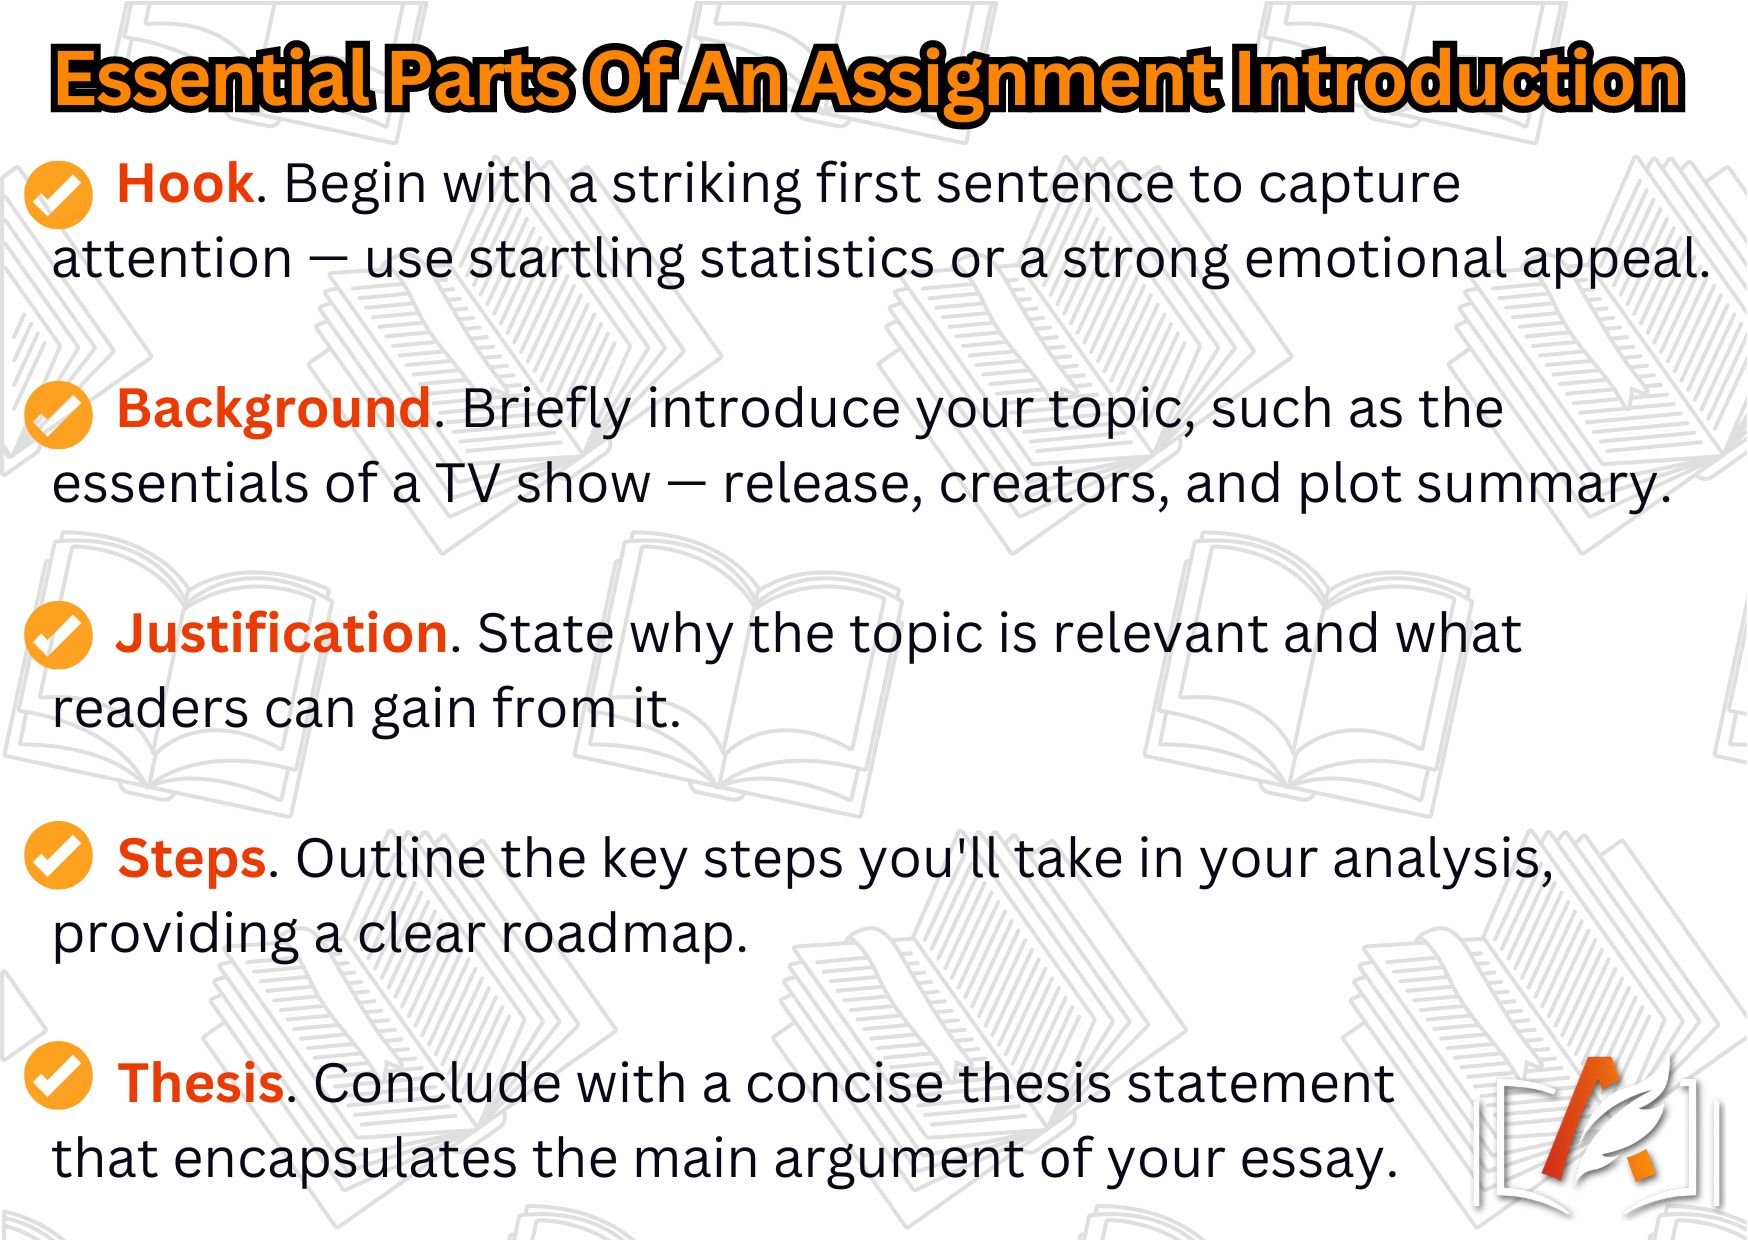 essential-parts-of-an-assignment-introduction